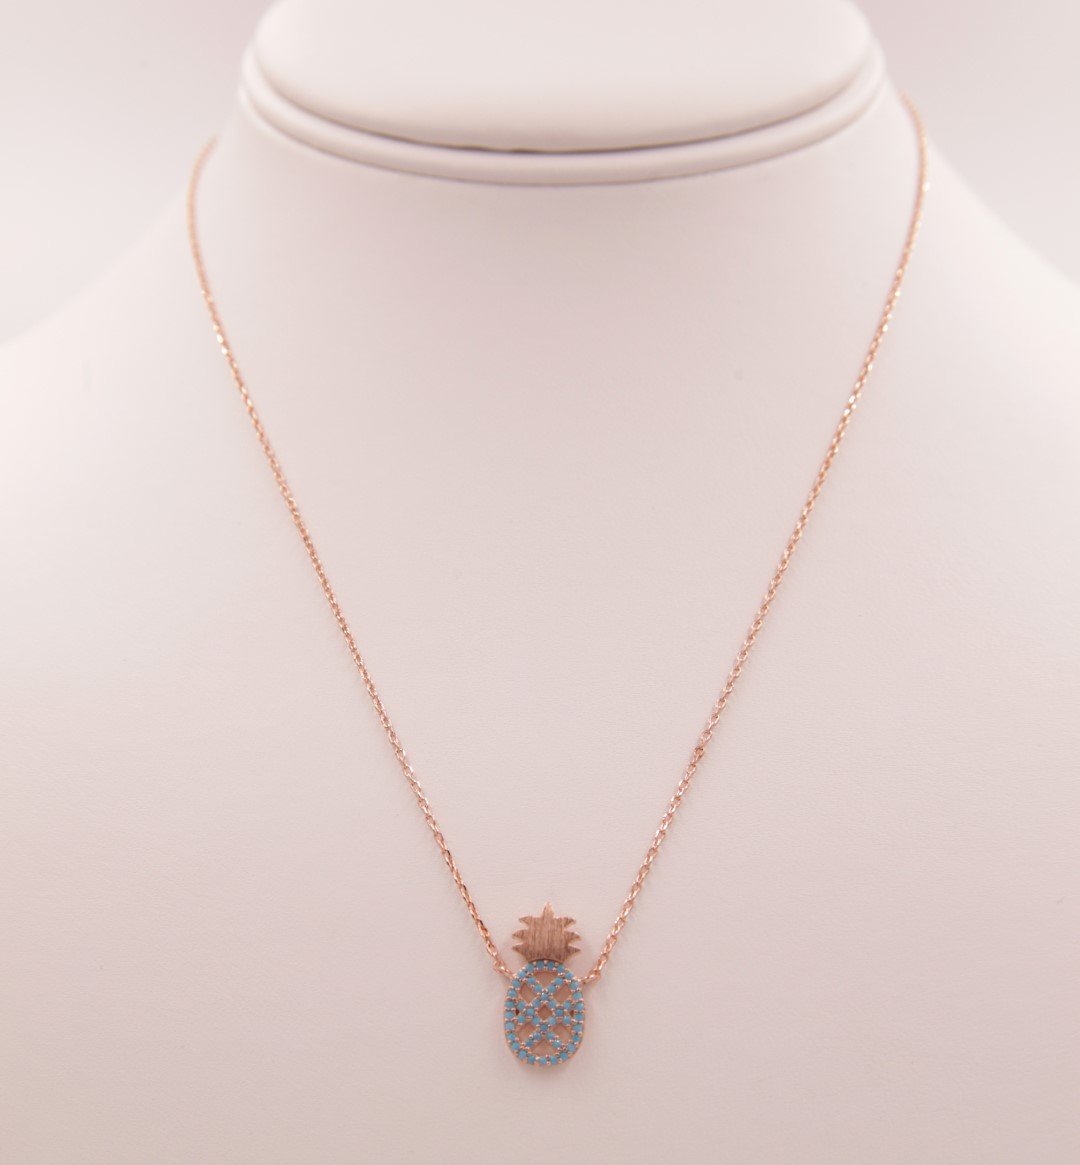 Dainty Turquoise Pineapple Necklace - Necklaces